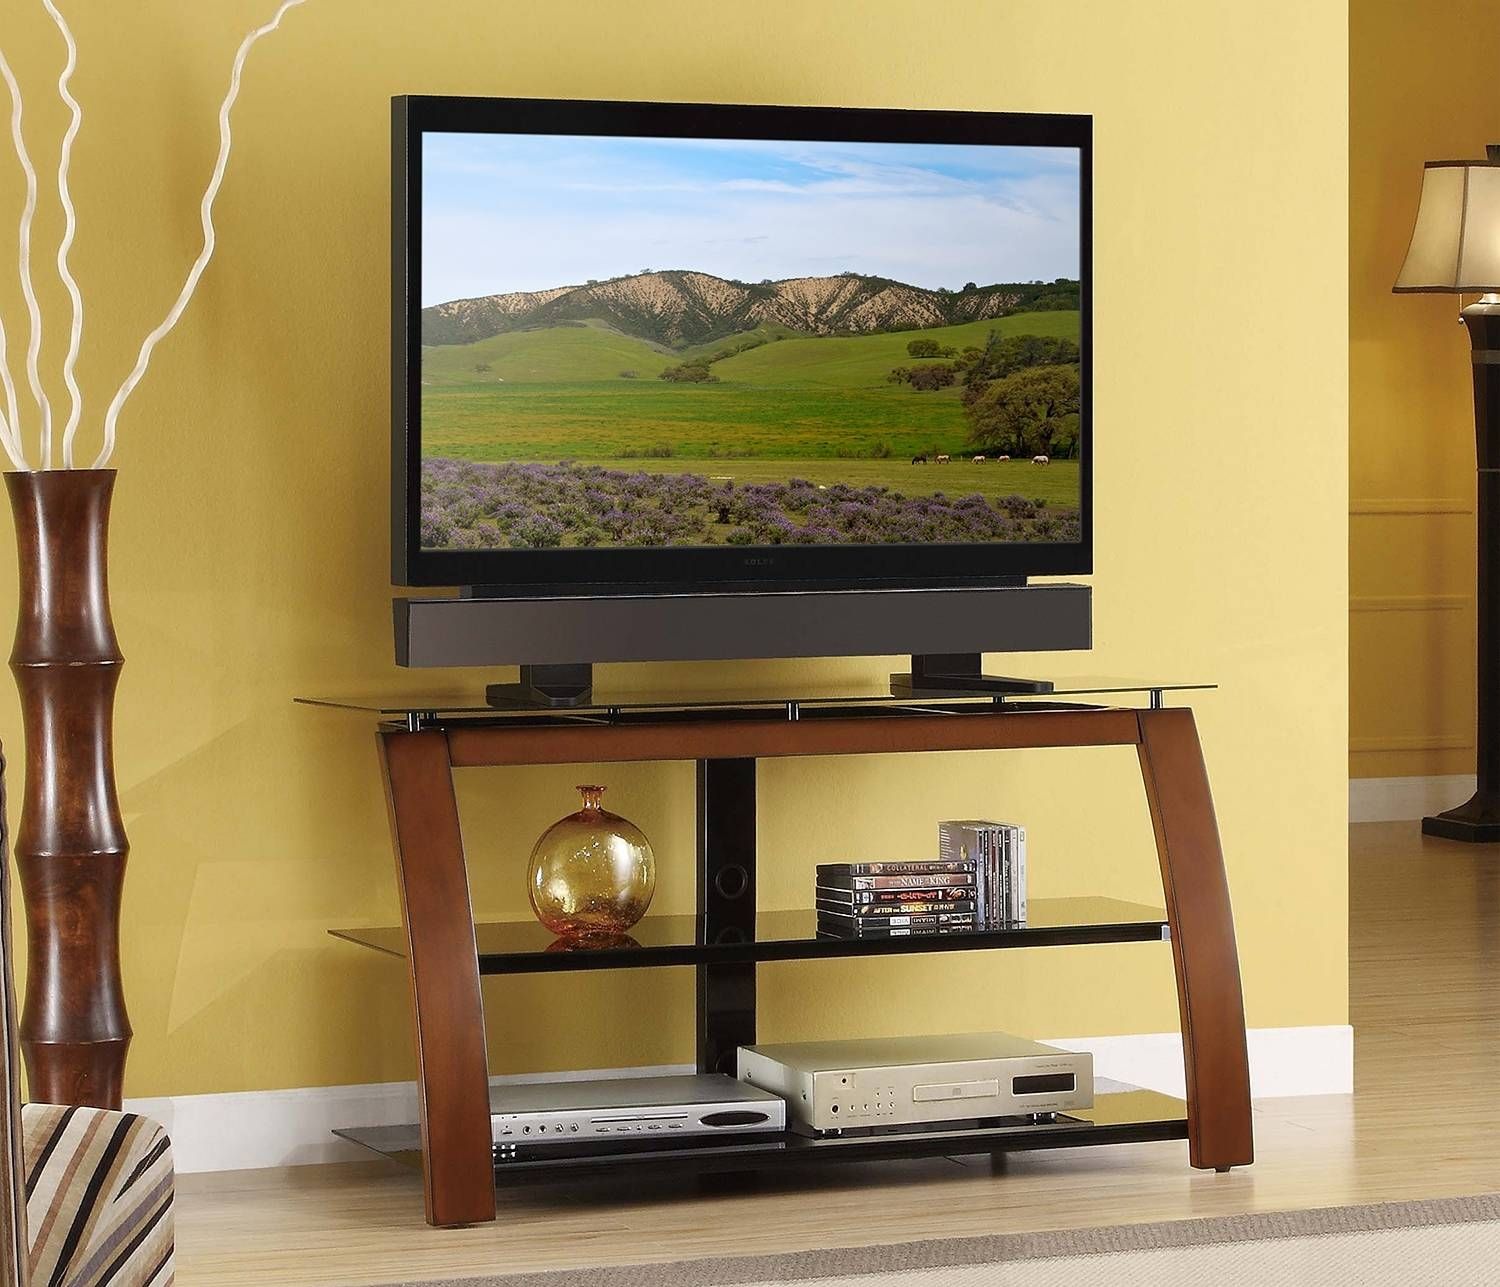 Tv Stand: Whalen Tv Stand | Walmart Tv Stand | Walmart Tv Stands With Regard To Tv Stands 40 Inches Wide (View 7 of 15)